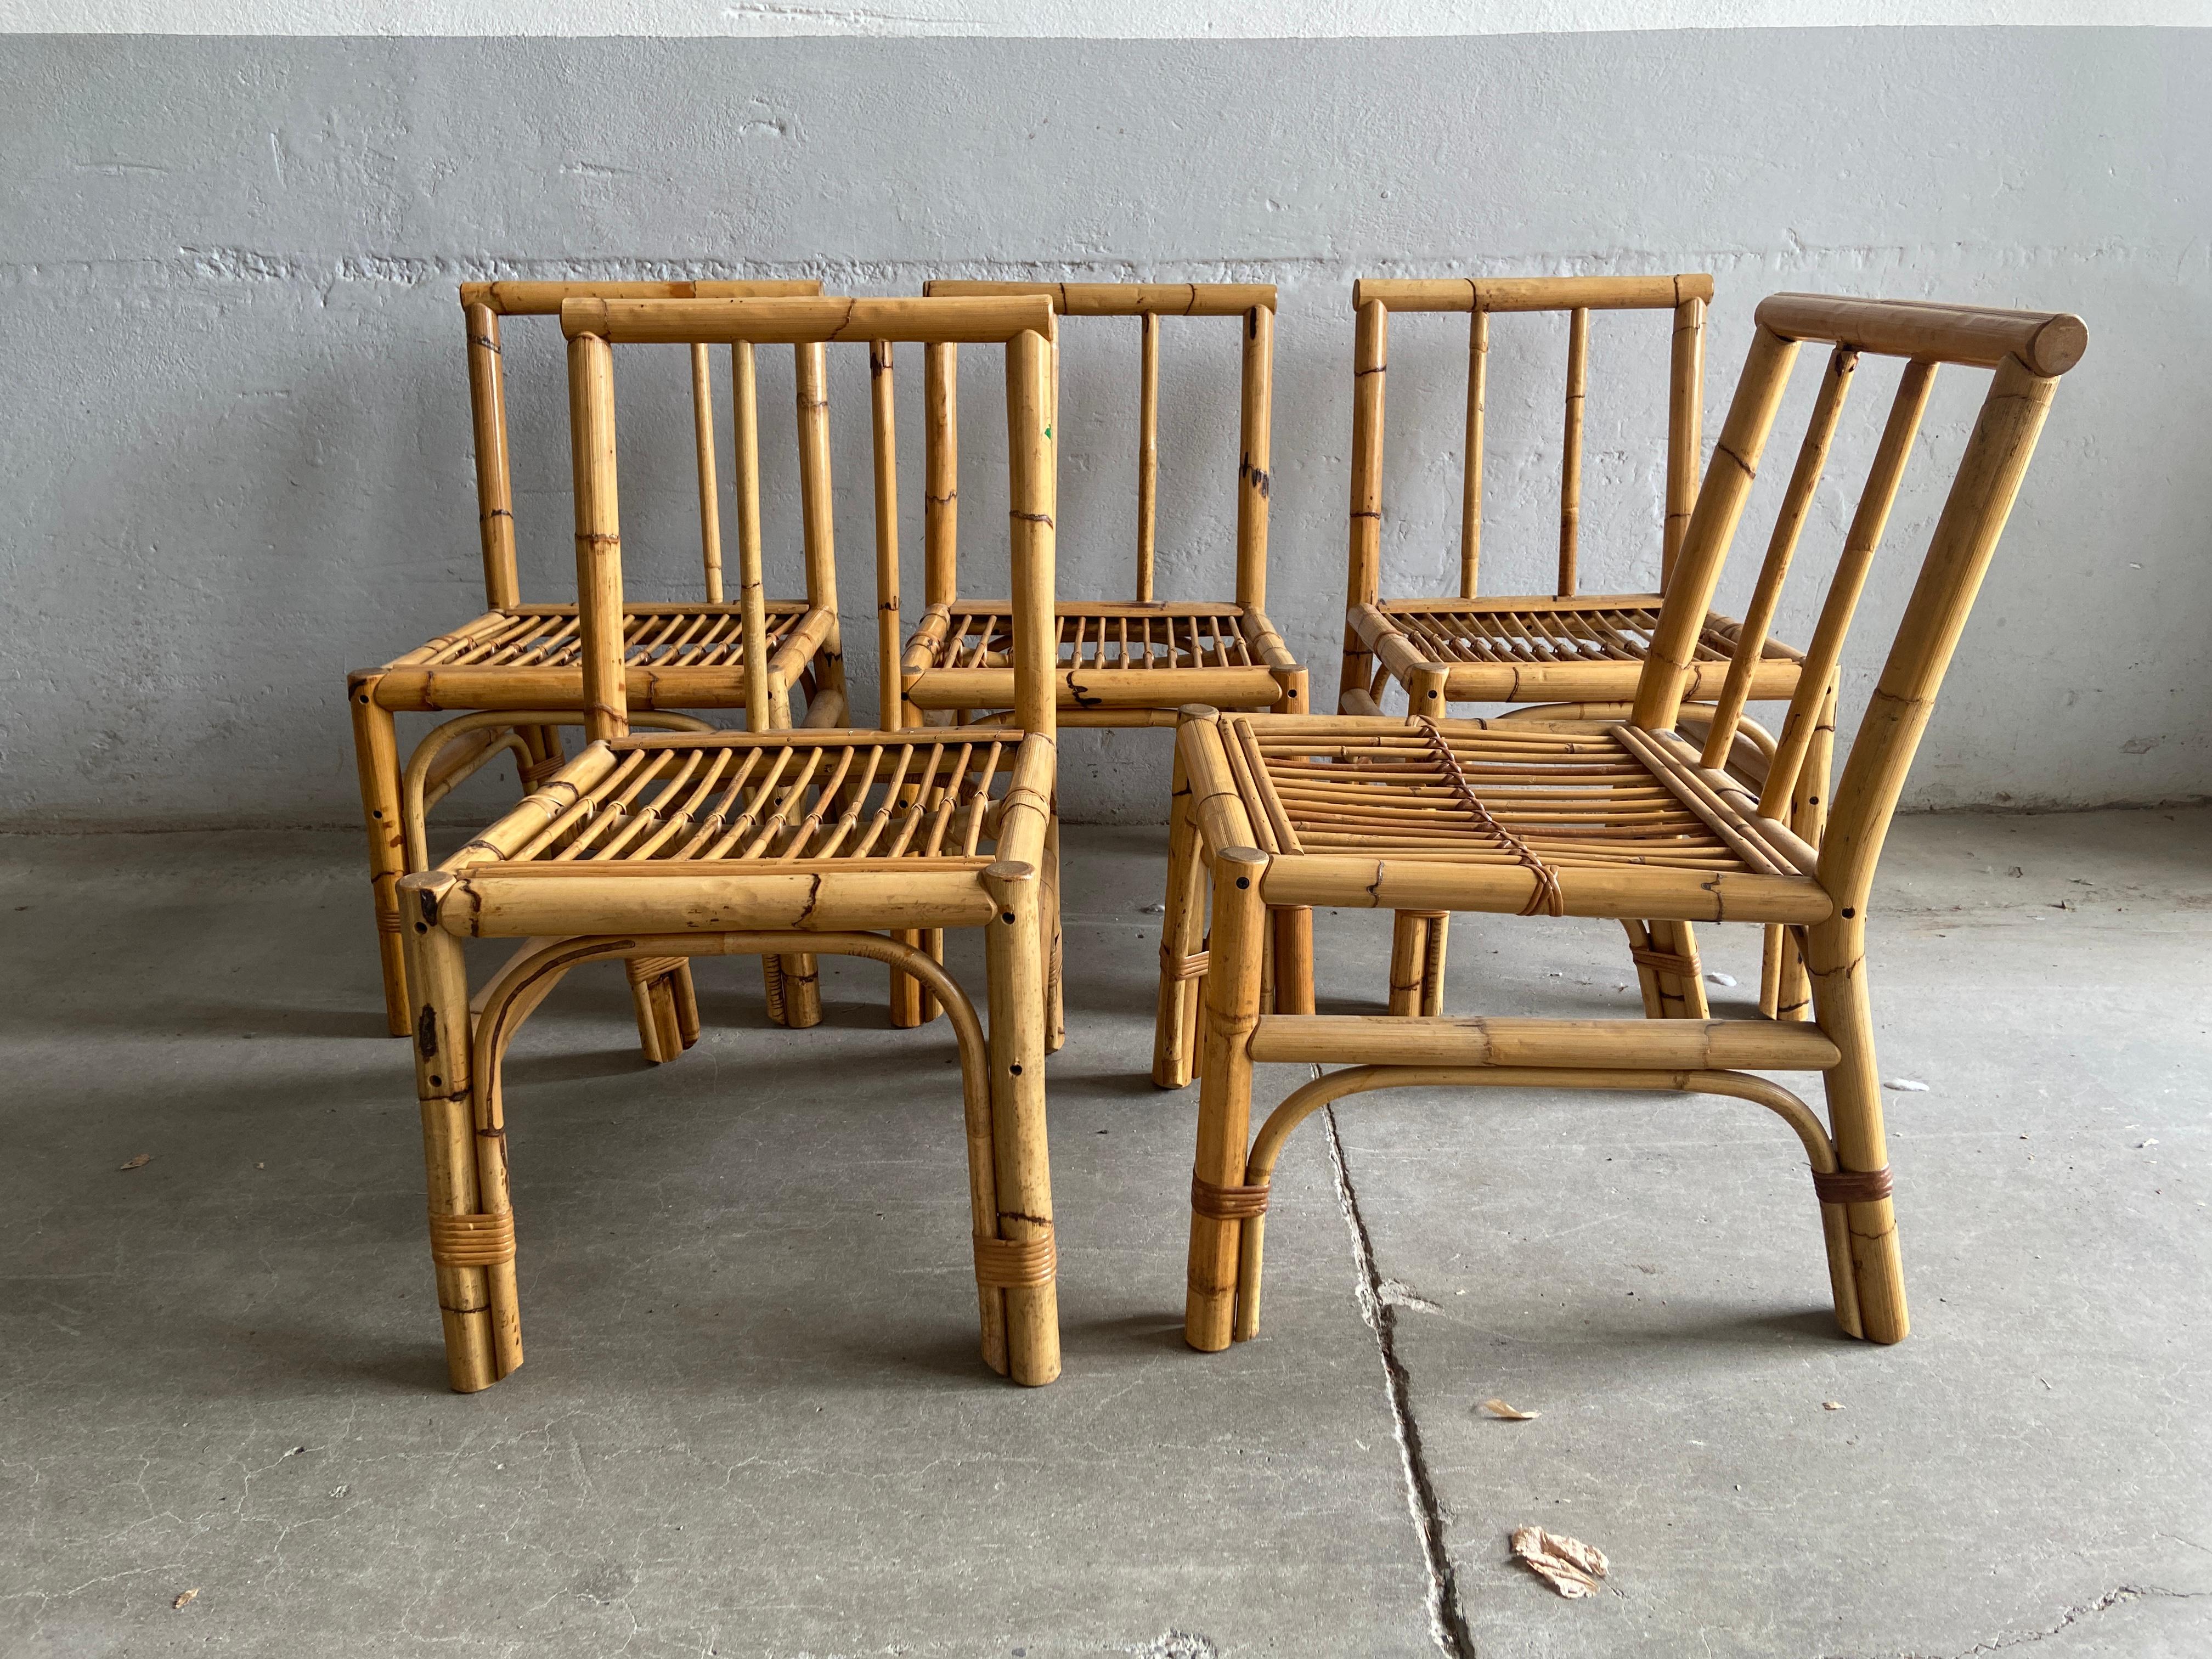 Late 20th Century Mid-Century Modern Italian Set of 5 Bamboo and Rattan Chairs, 1970s For Sale